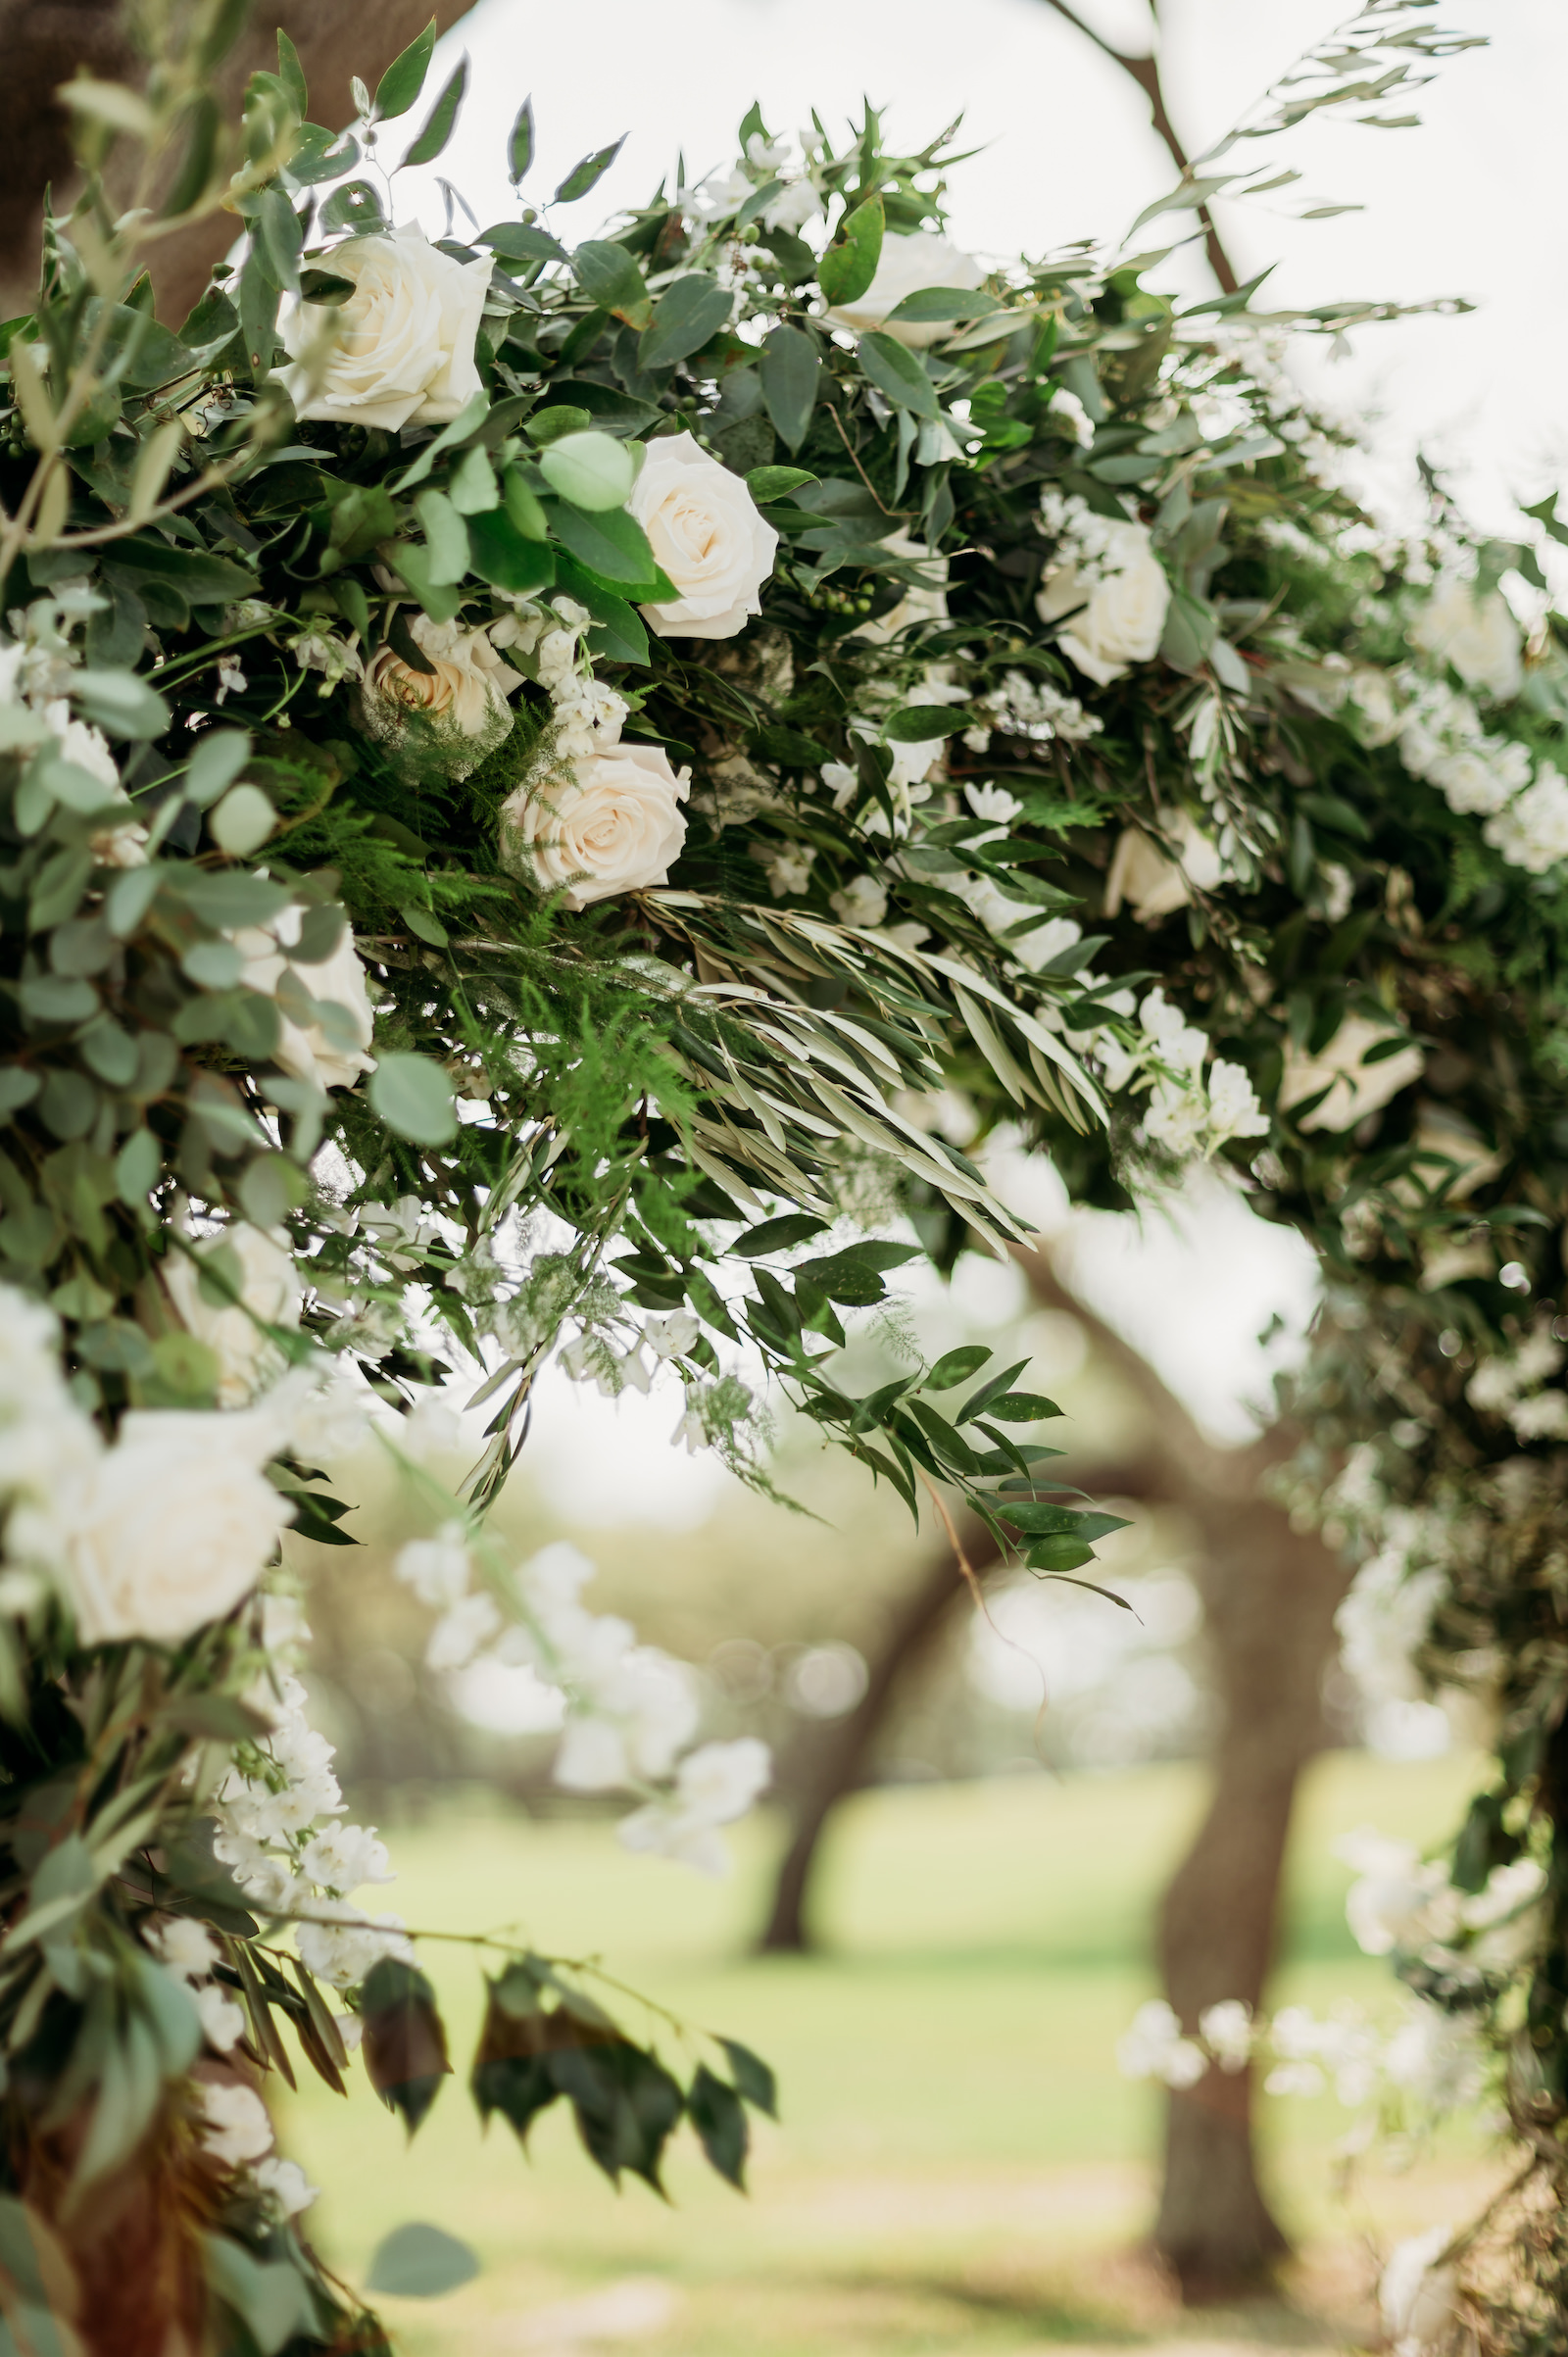 Classic Tampa Wedding Ceremony Decor, Lush Greenery and White Roses Floral Arch